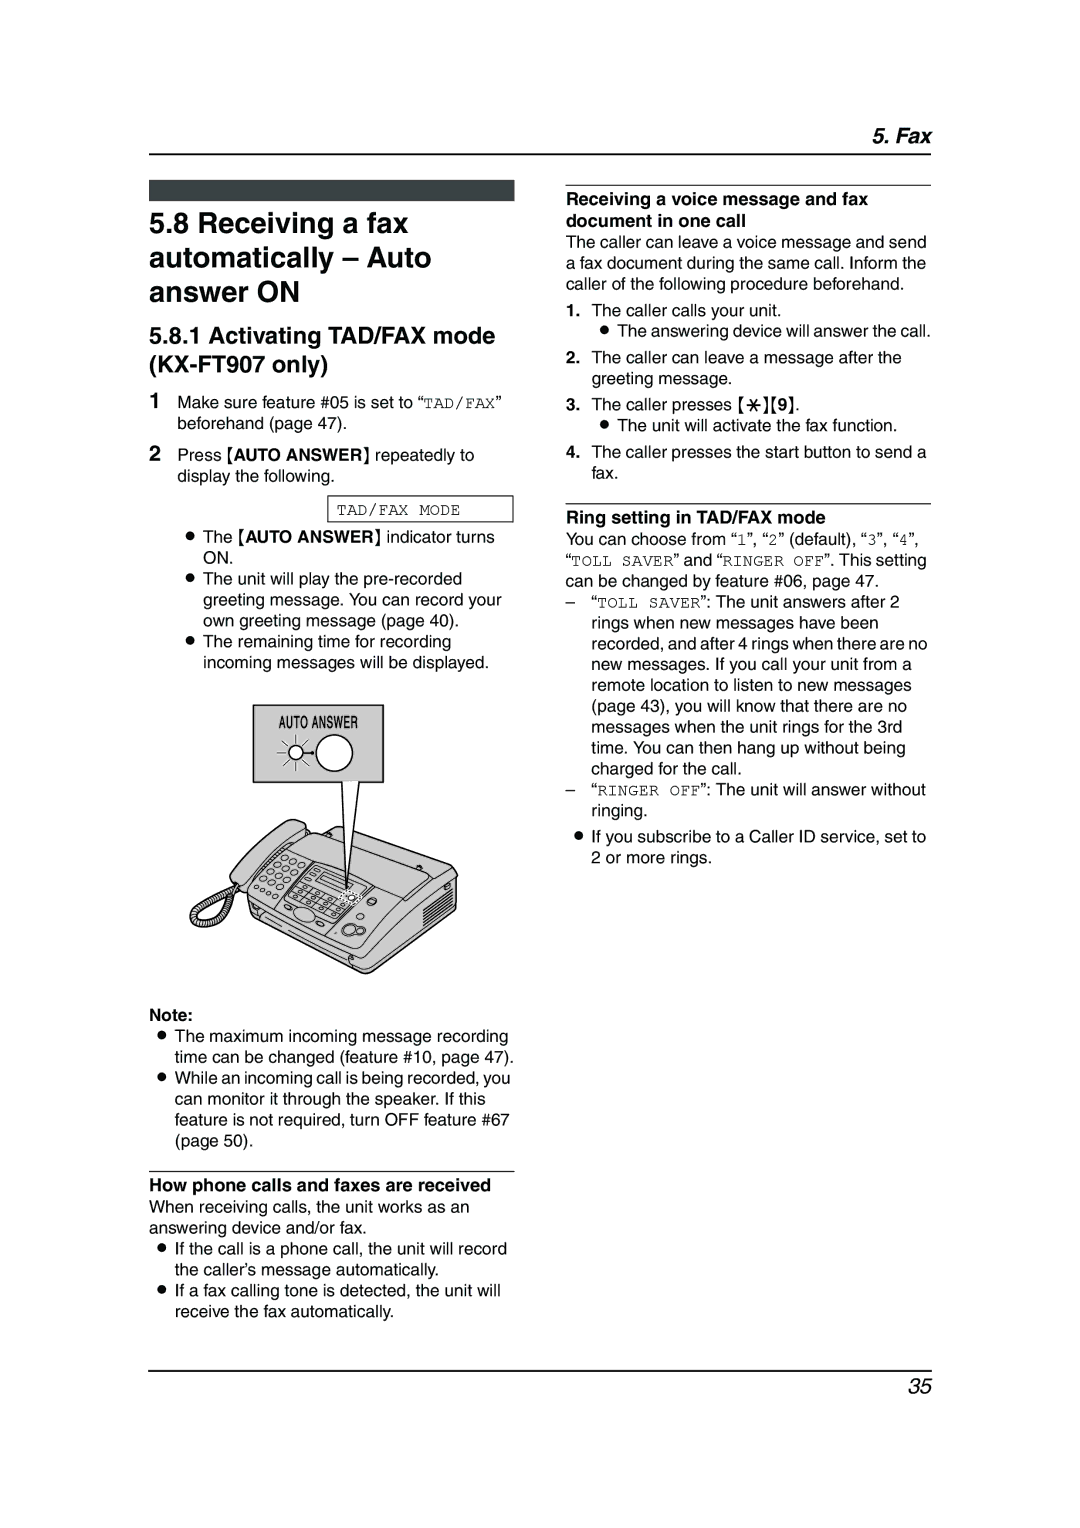 Panasonic KX-FT901BX manual Receiving a fax automatically Auto answer on, Activating TAD/FAX mode KX-FT907 only 